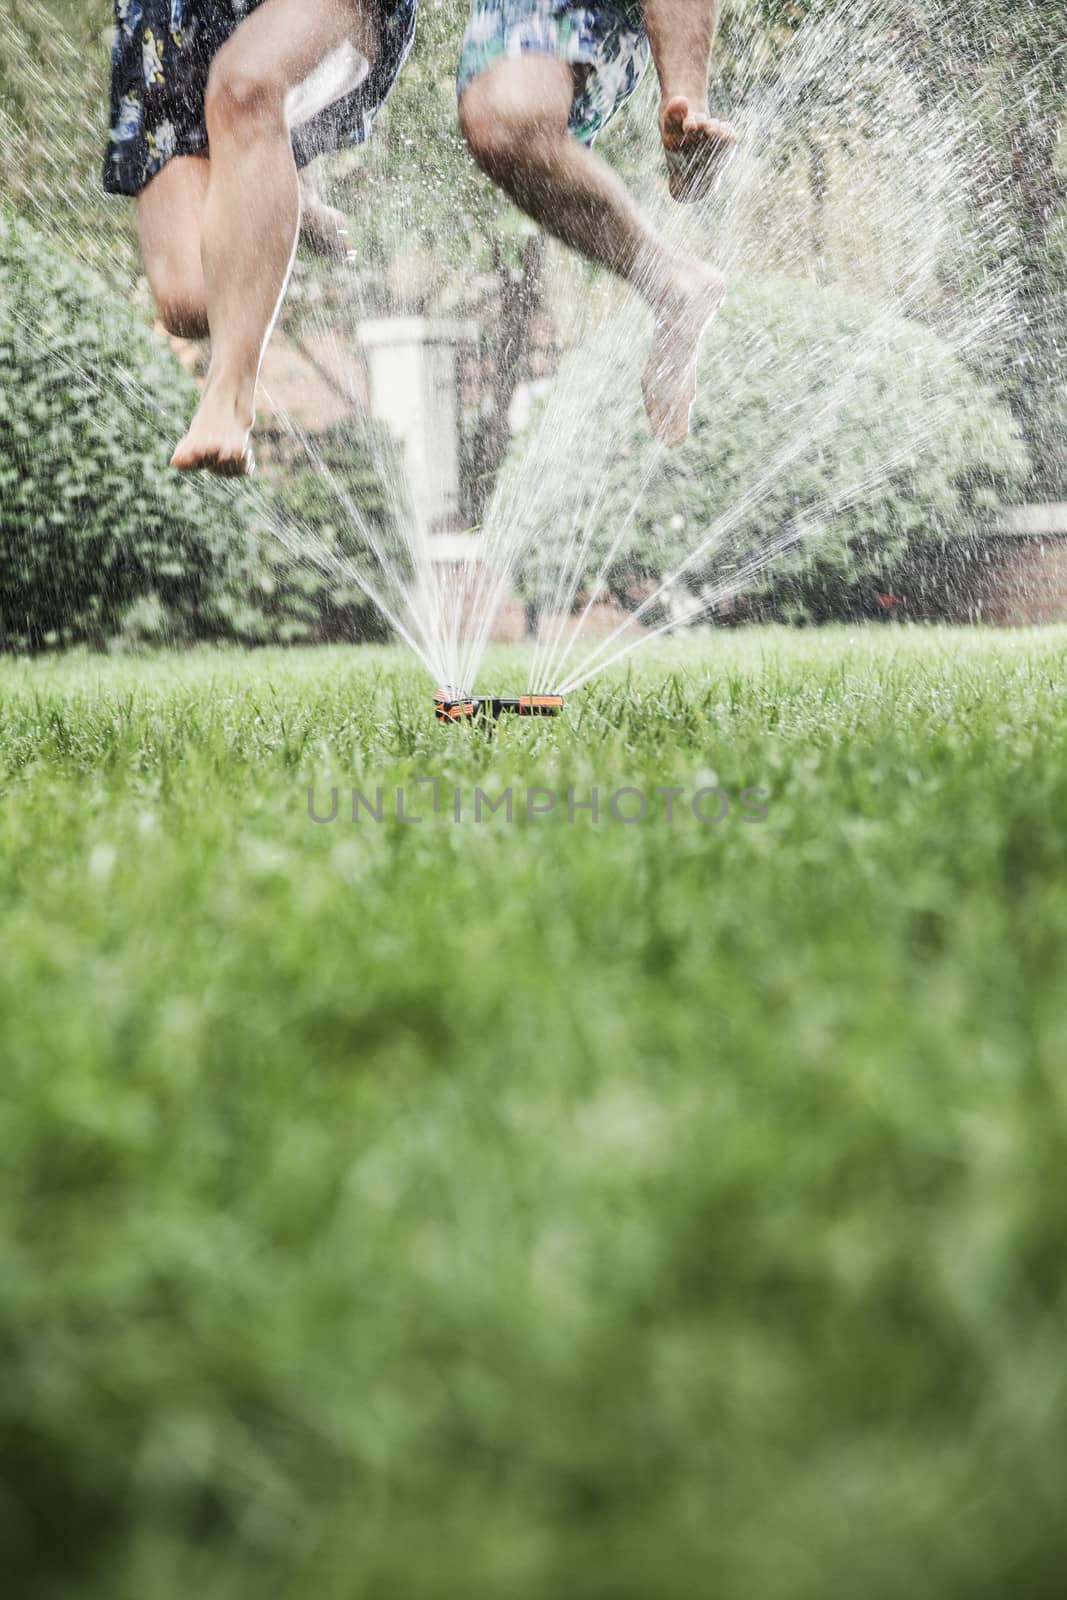 Two people jumping through a sprinkler, mid-air, surface level shot